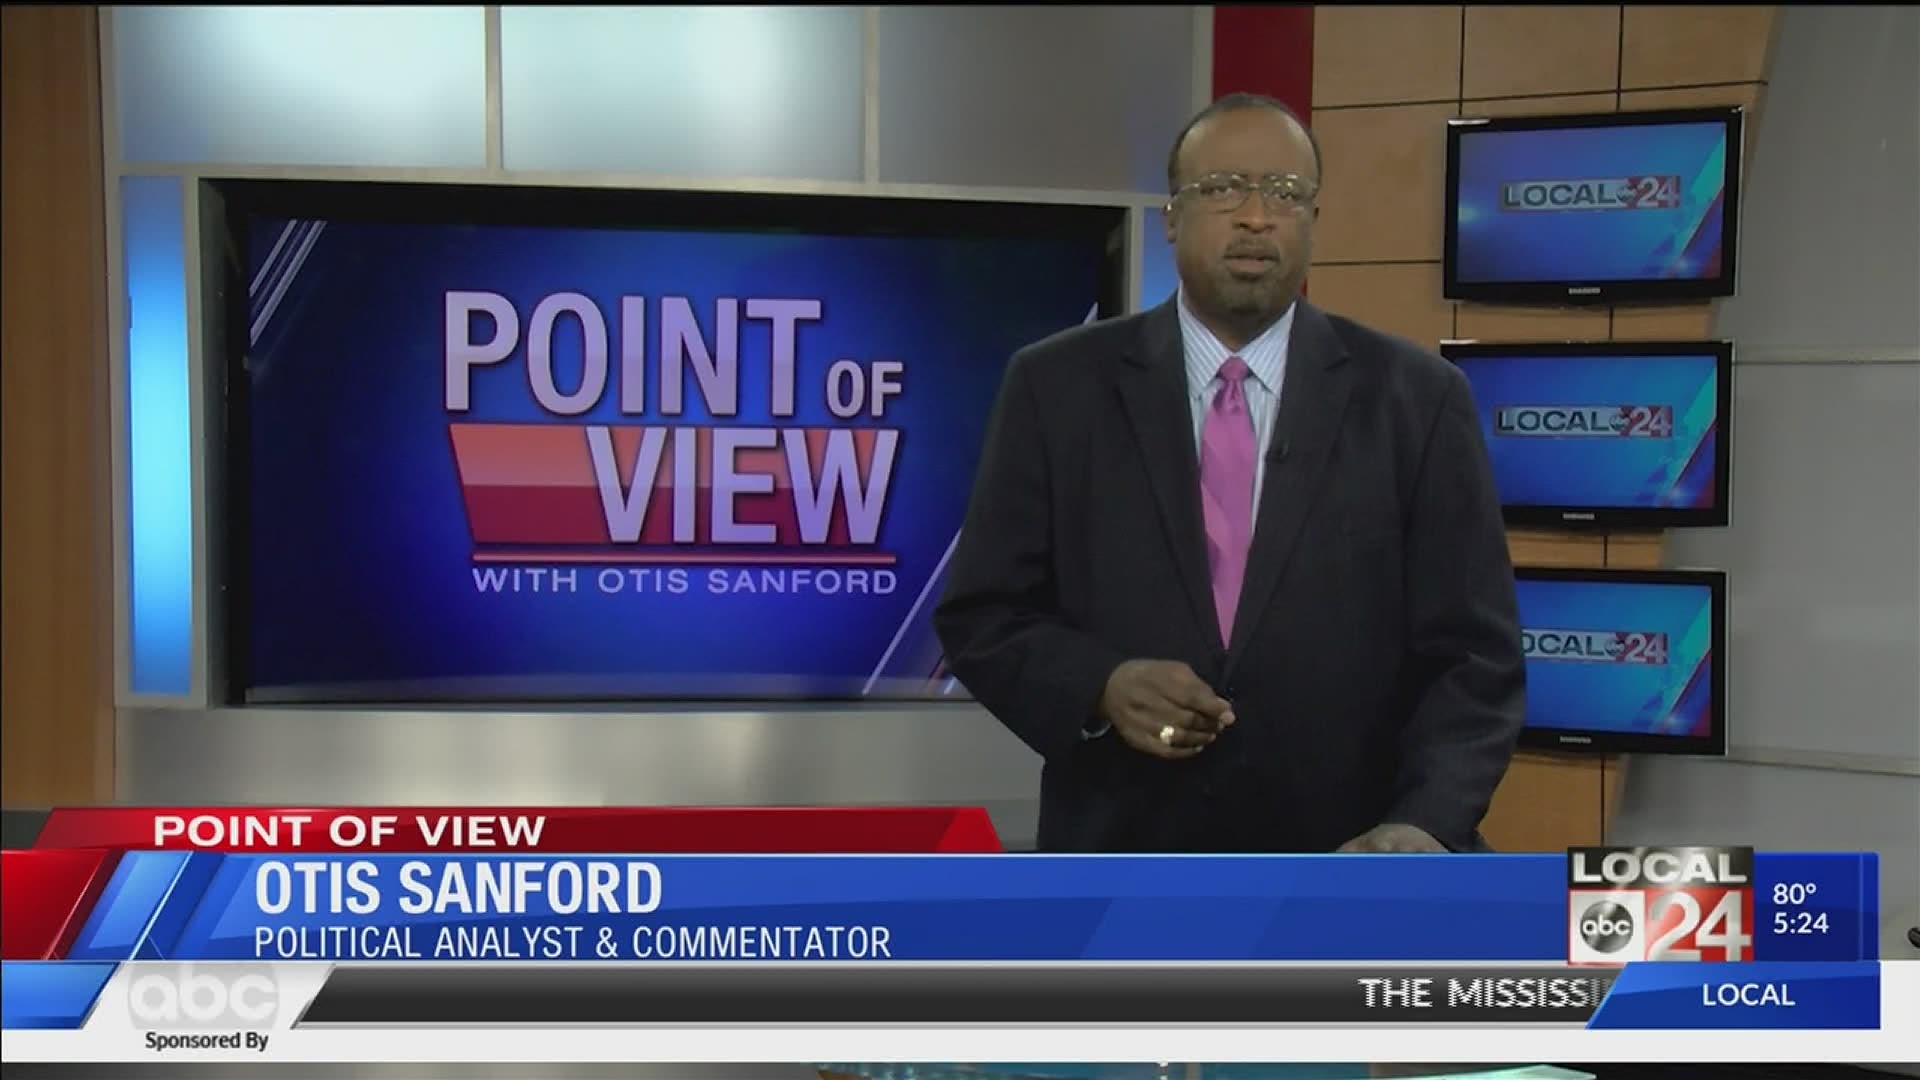 Local 24 News political analyst & commentator Otis Sanford shares his point of view on a proposal to change the name of part of Poplar Avenue to Black Lives Matter.